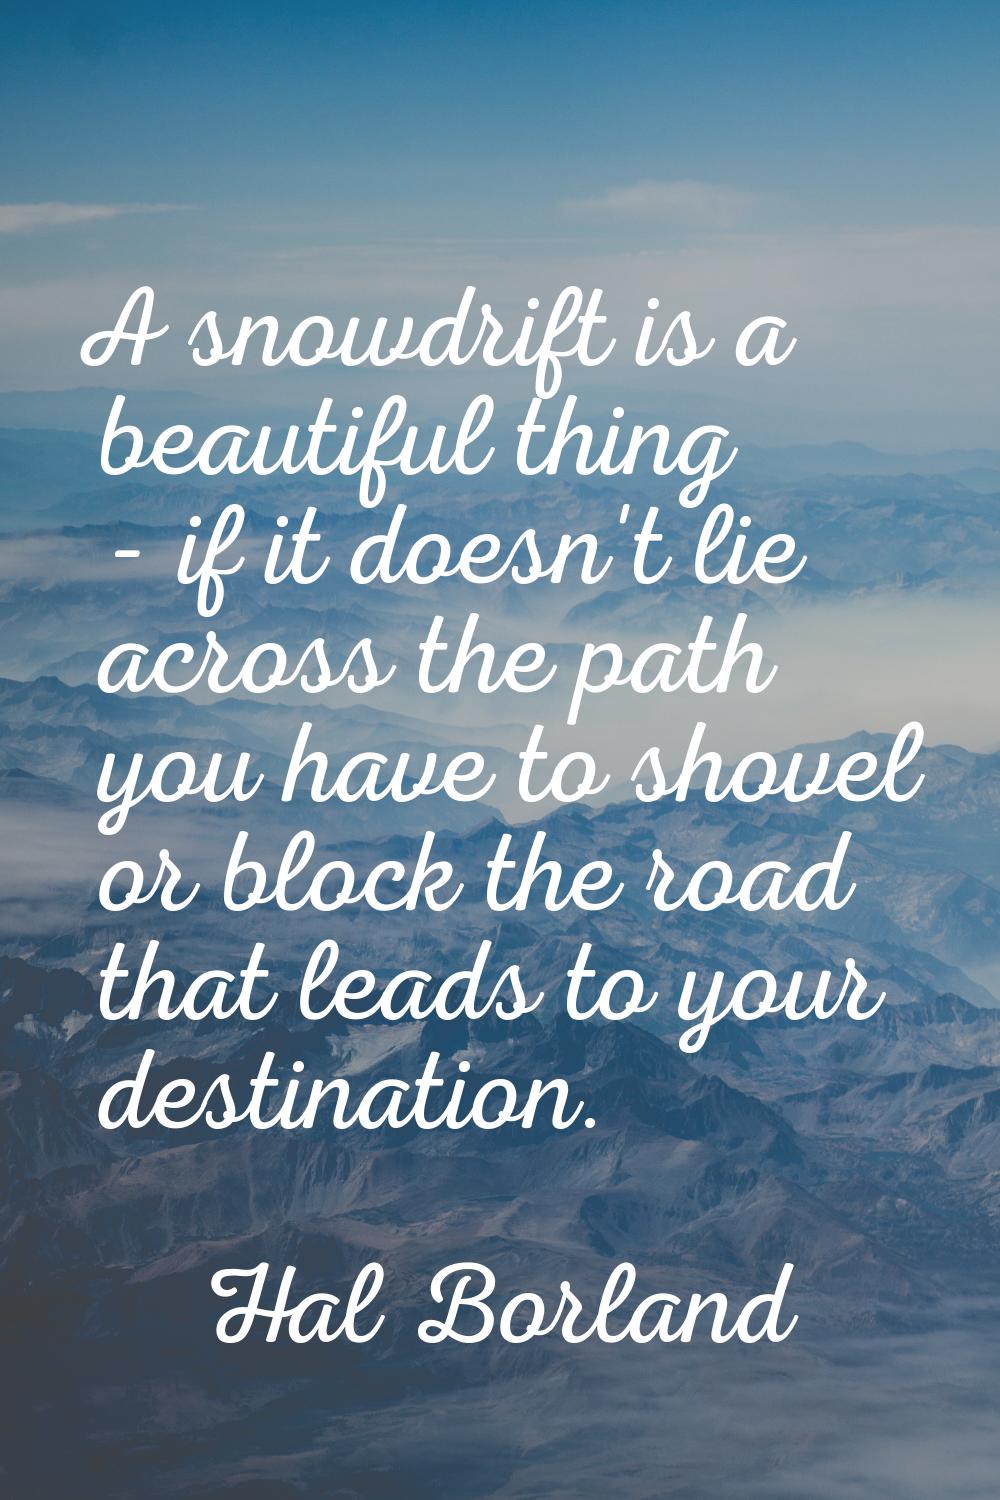 A snowdrift is a beautiful thing - if it doesn't lie across the path you have to shovel or block th